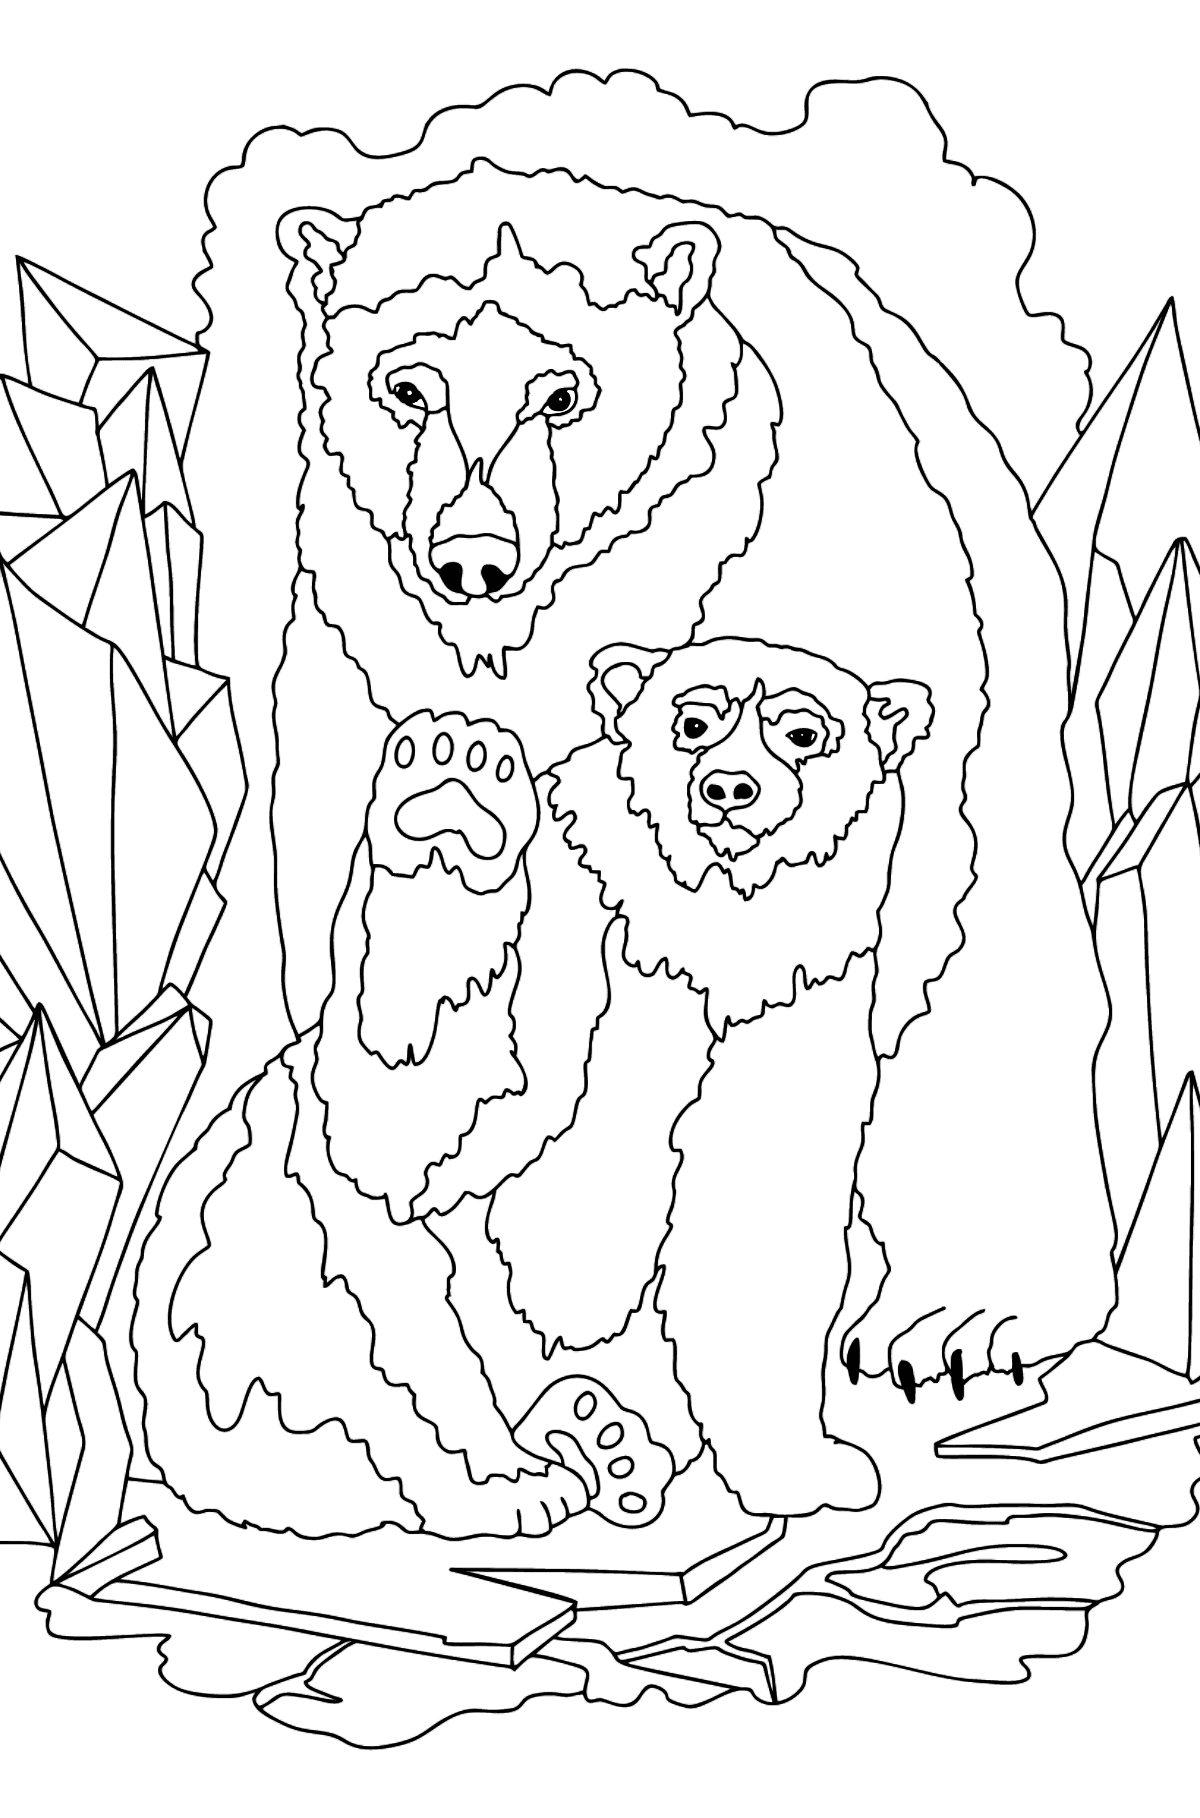 Coloring page for adults - A Polar Bear with a Bear Cub ♥ Online!